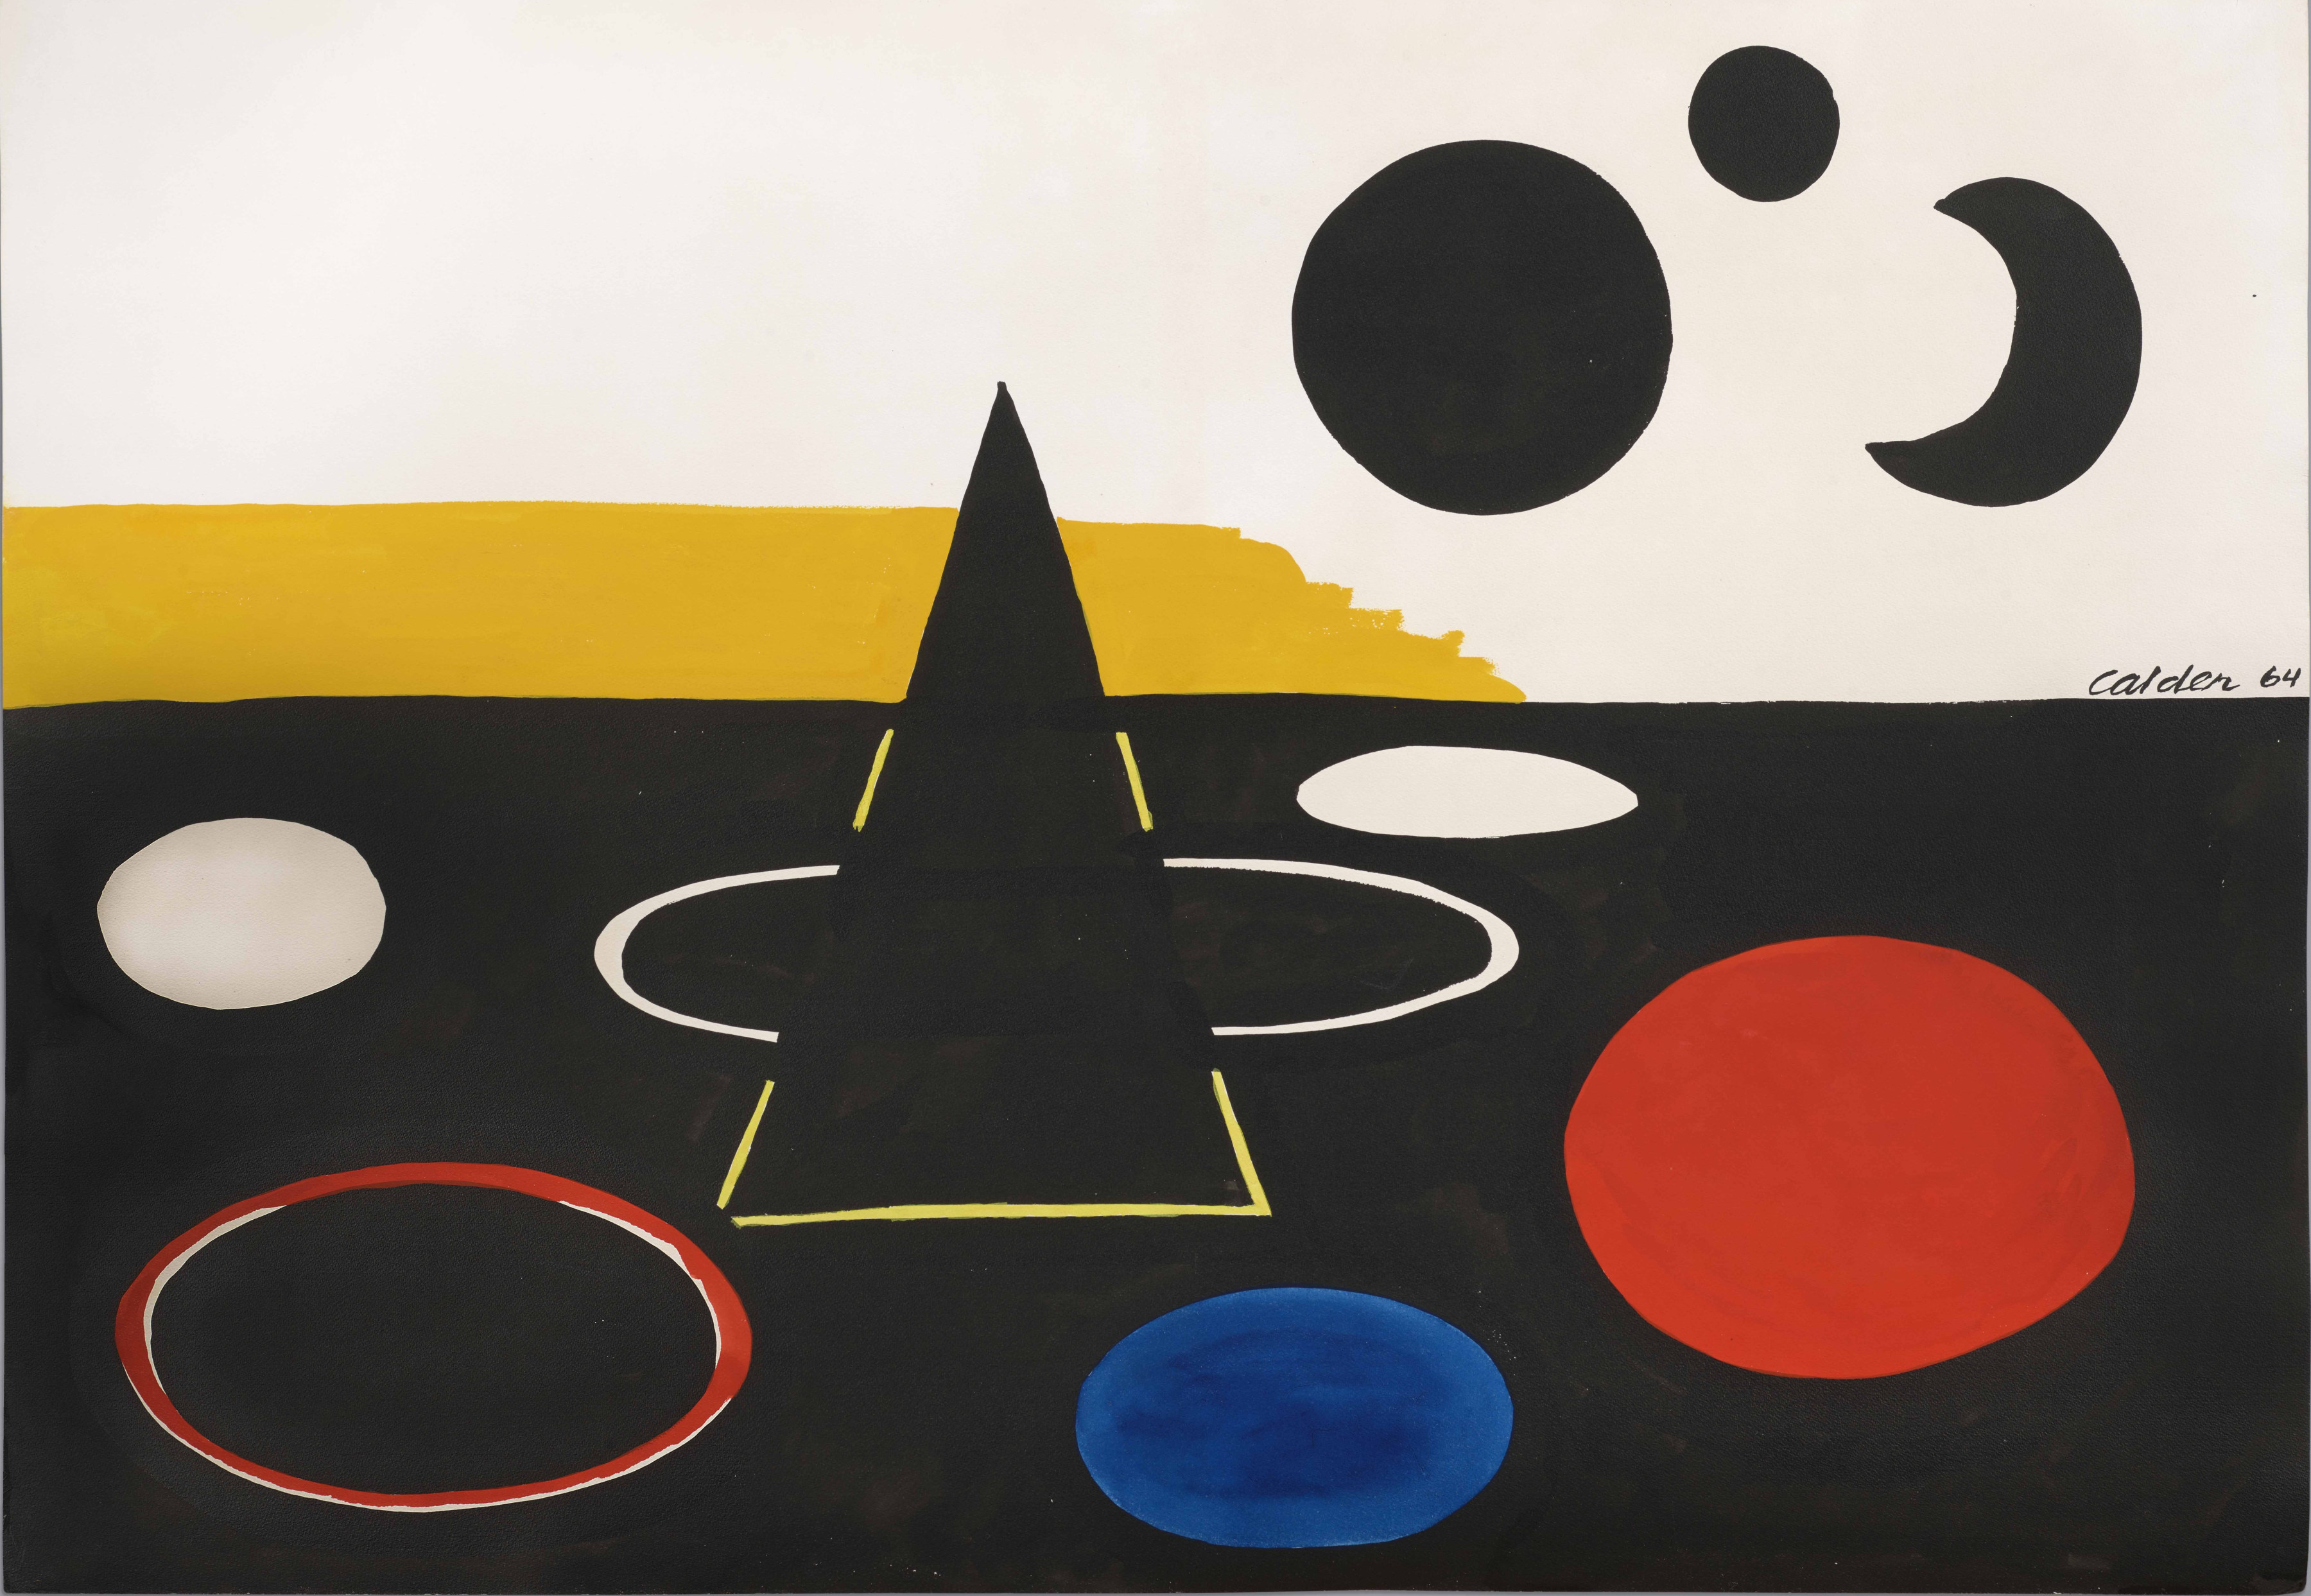 About the Artwork Alexander Calder (1898 1976) Planetary Motion, 1964  Ink and Gouache on Paper  29 X 42 ¼ In.  by Alexander Calder